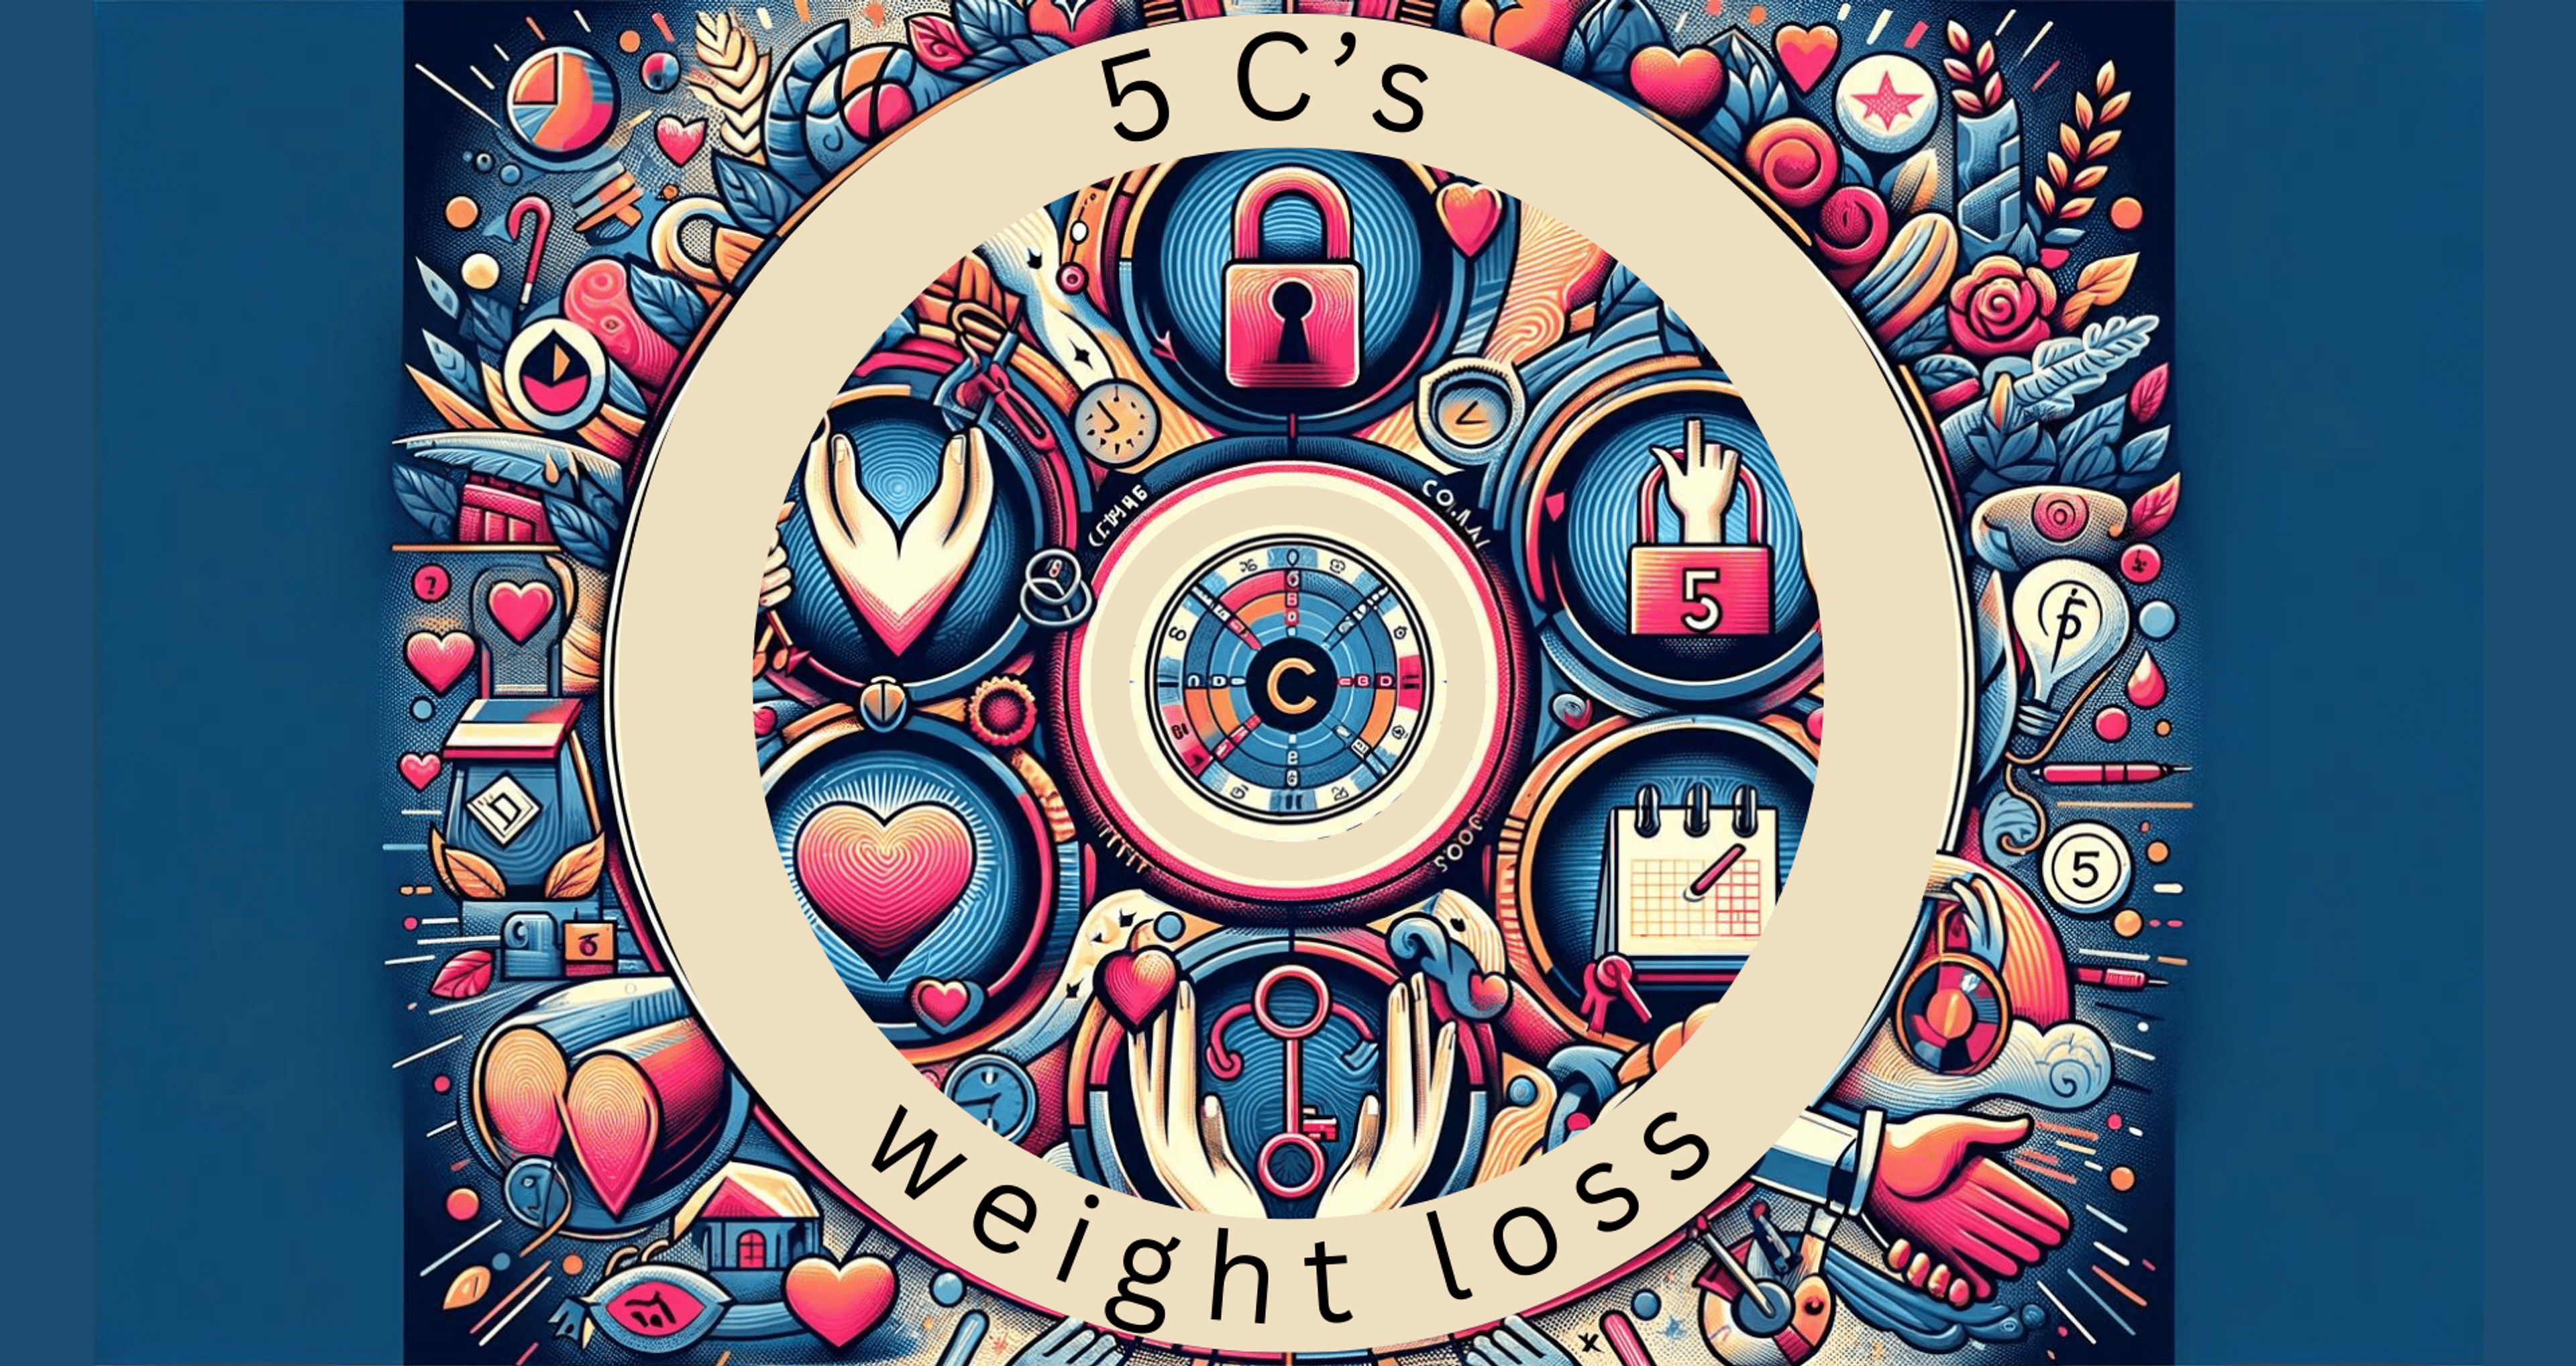 What are the 5 C's of Weight Loss?